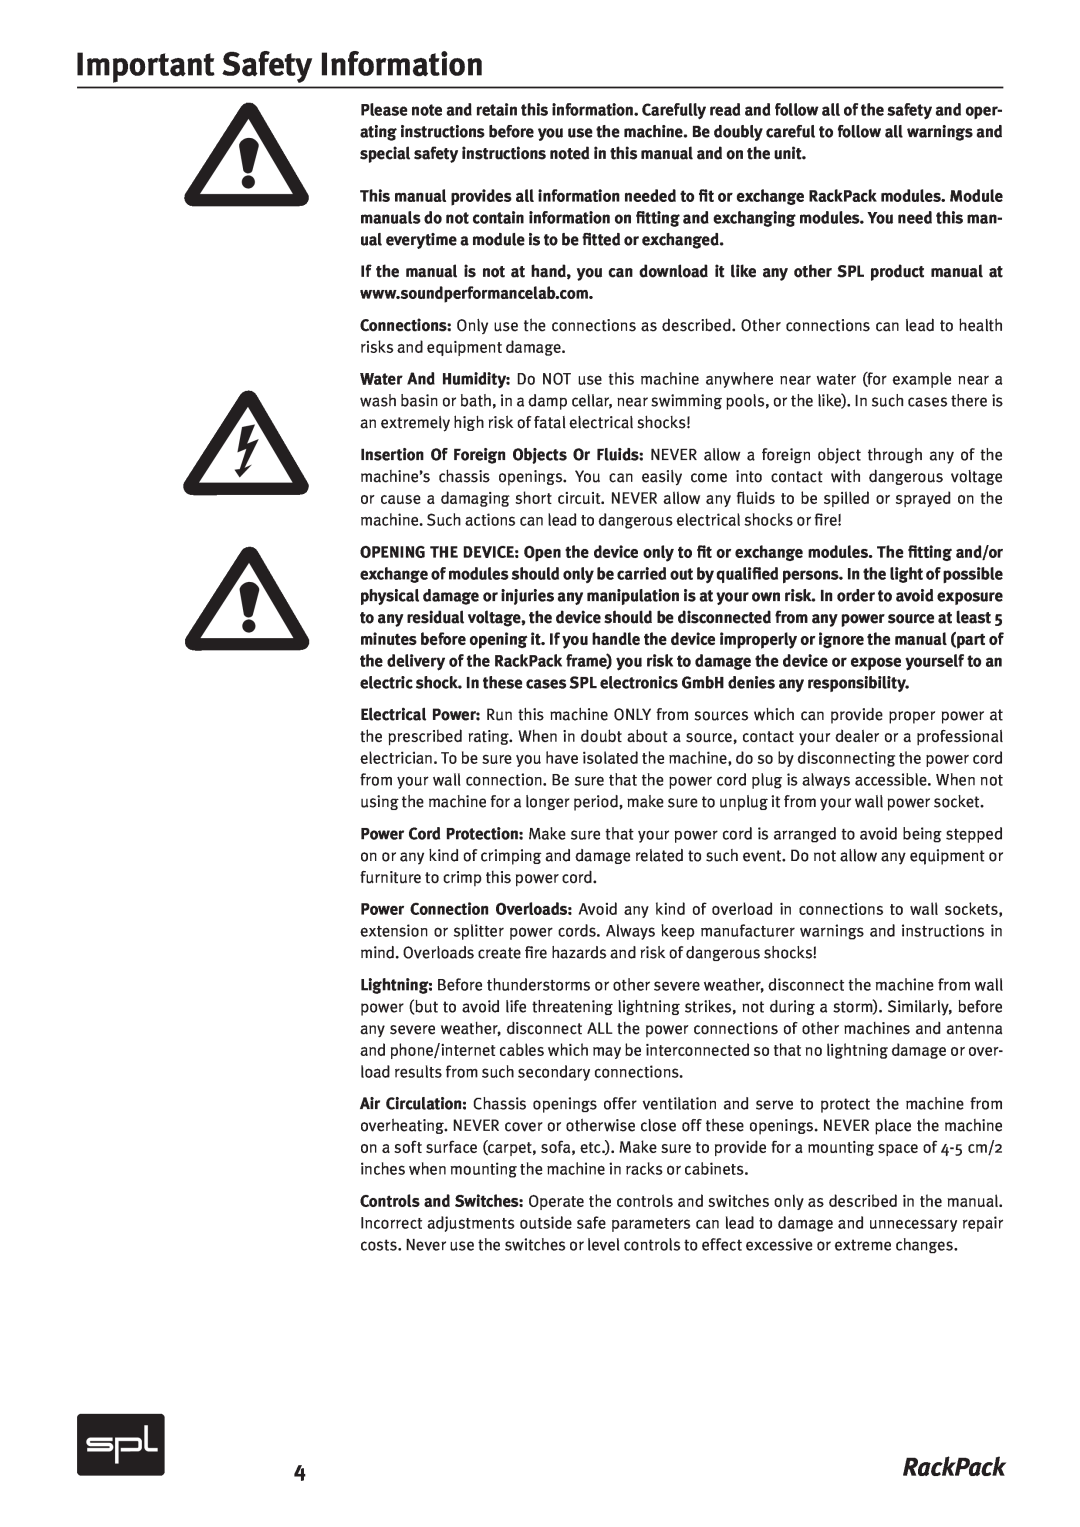 Sound Performance Lab 2710 manual Important Safety Information, RackPack 